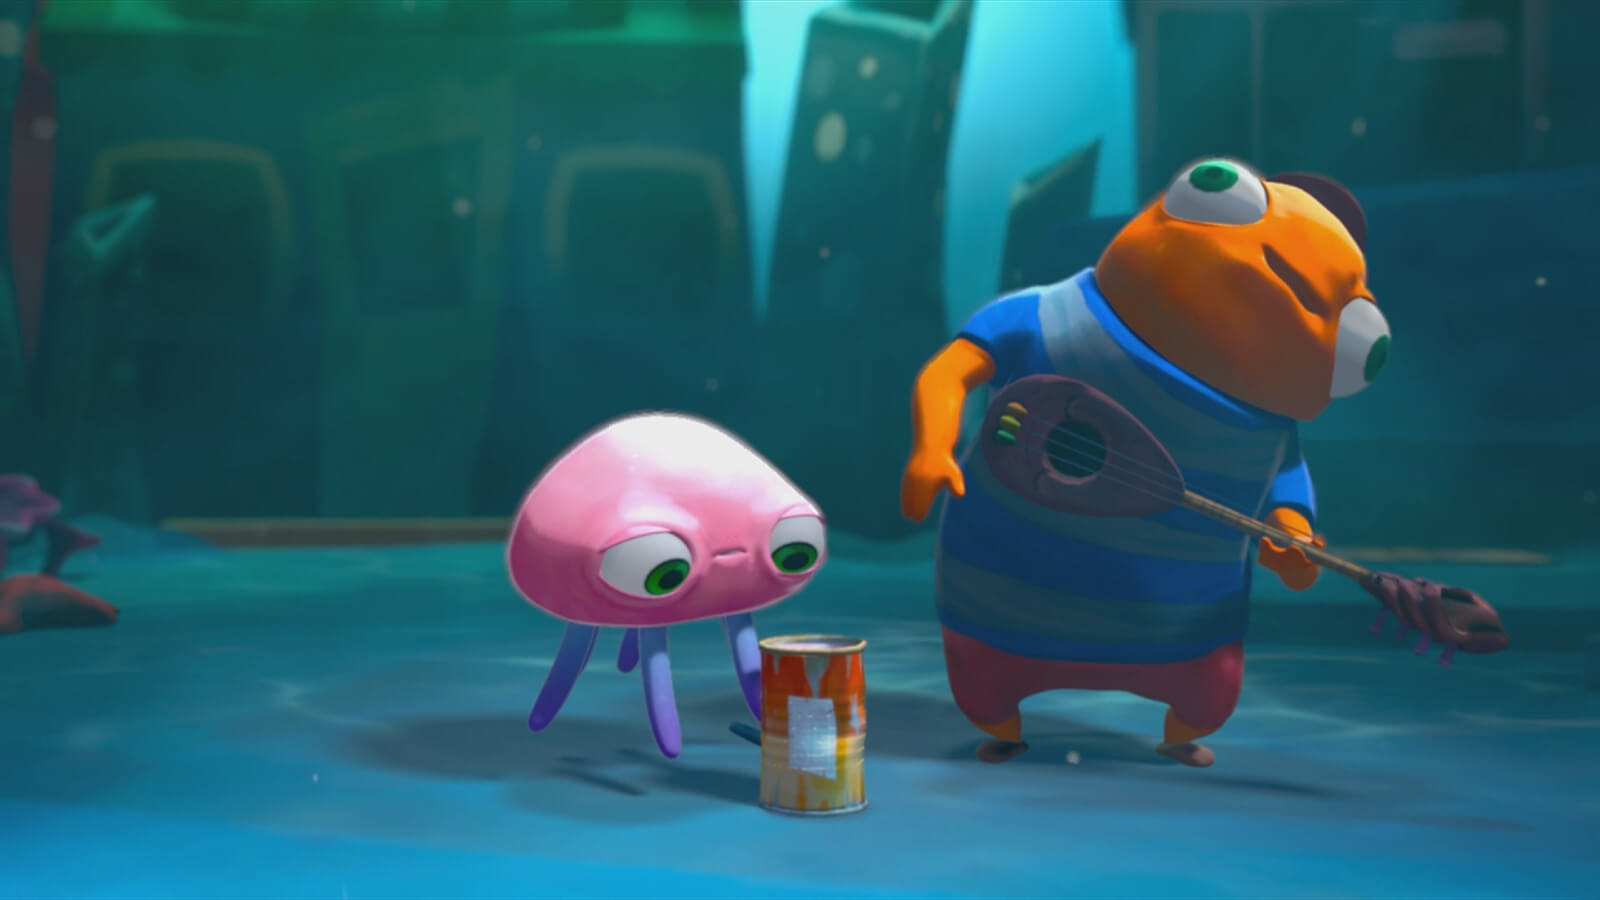 A small pink jellyfish looks at an open tin can in front of an orange fish holding a guitar-like instrument